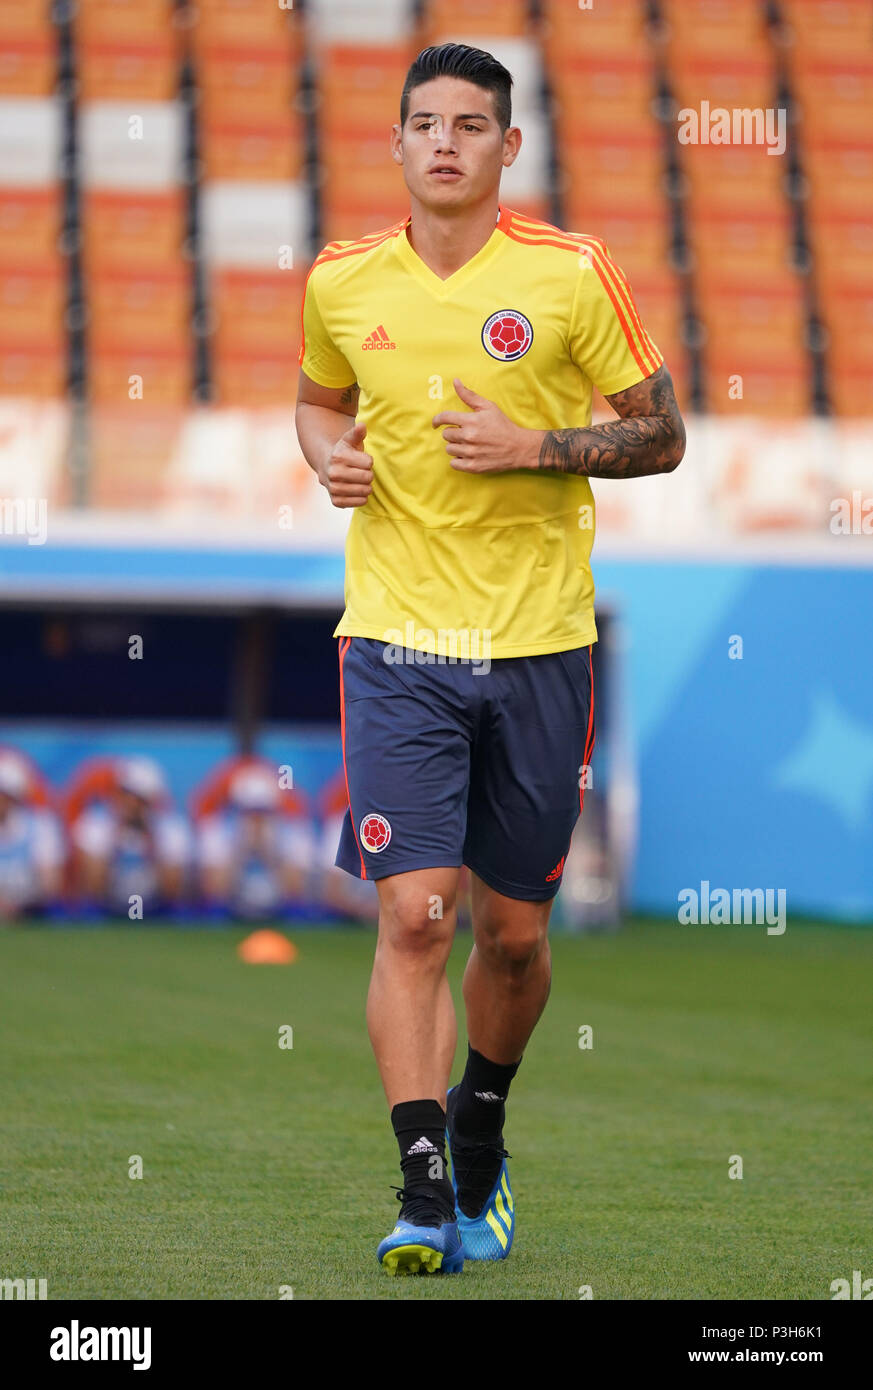 (180618) -- SARANSK, June 18, 2018(Xinhua) -- Colombia's James Rodriguez is seen during a training session prior to a group H match against Japan at the 2018 FIFA World Cup in Saransk, Russia, on June 18, 2018. (Xinhua/Lui Siu Wai) Stock Photo